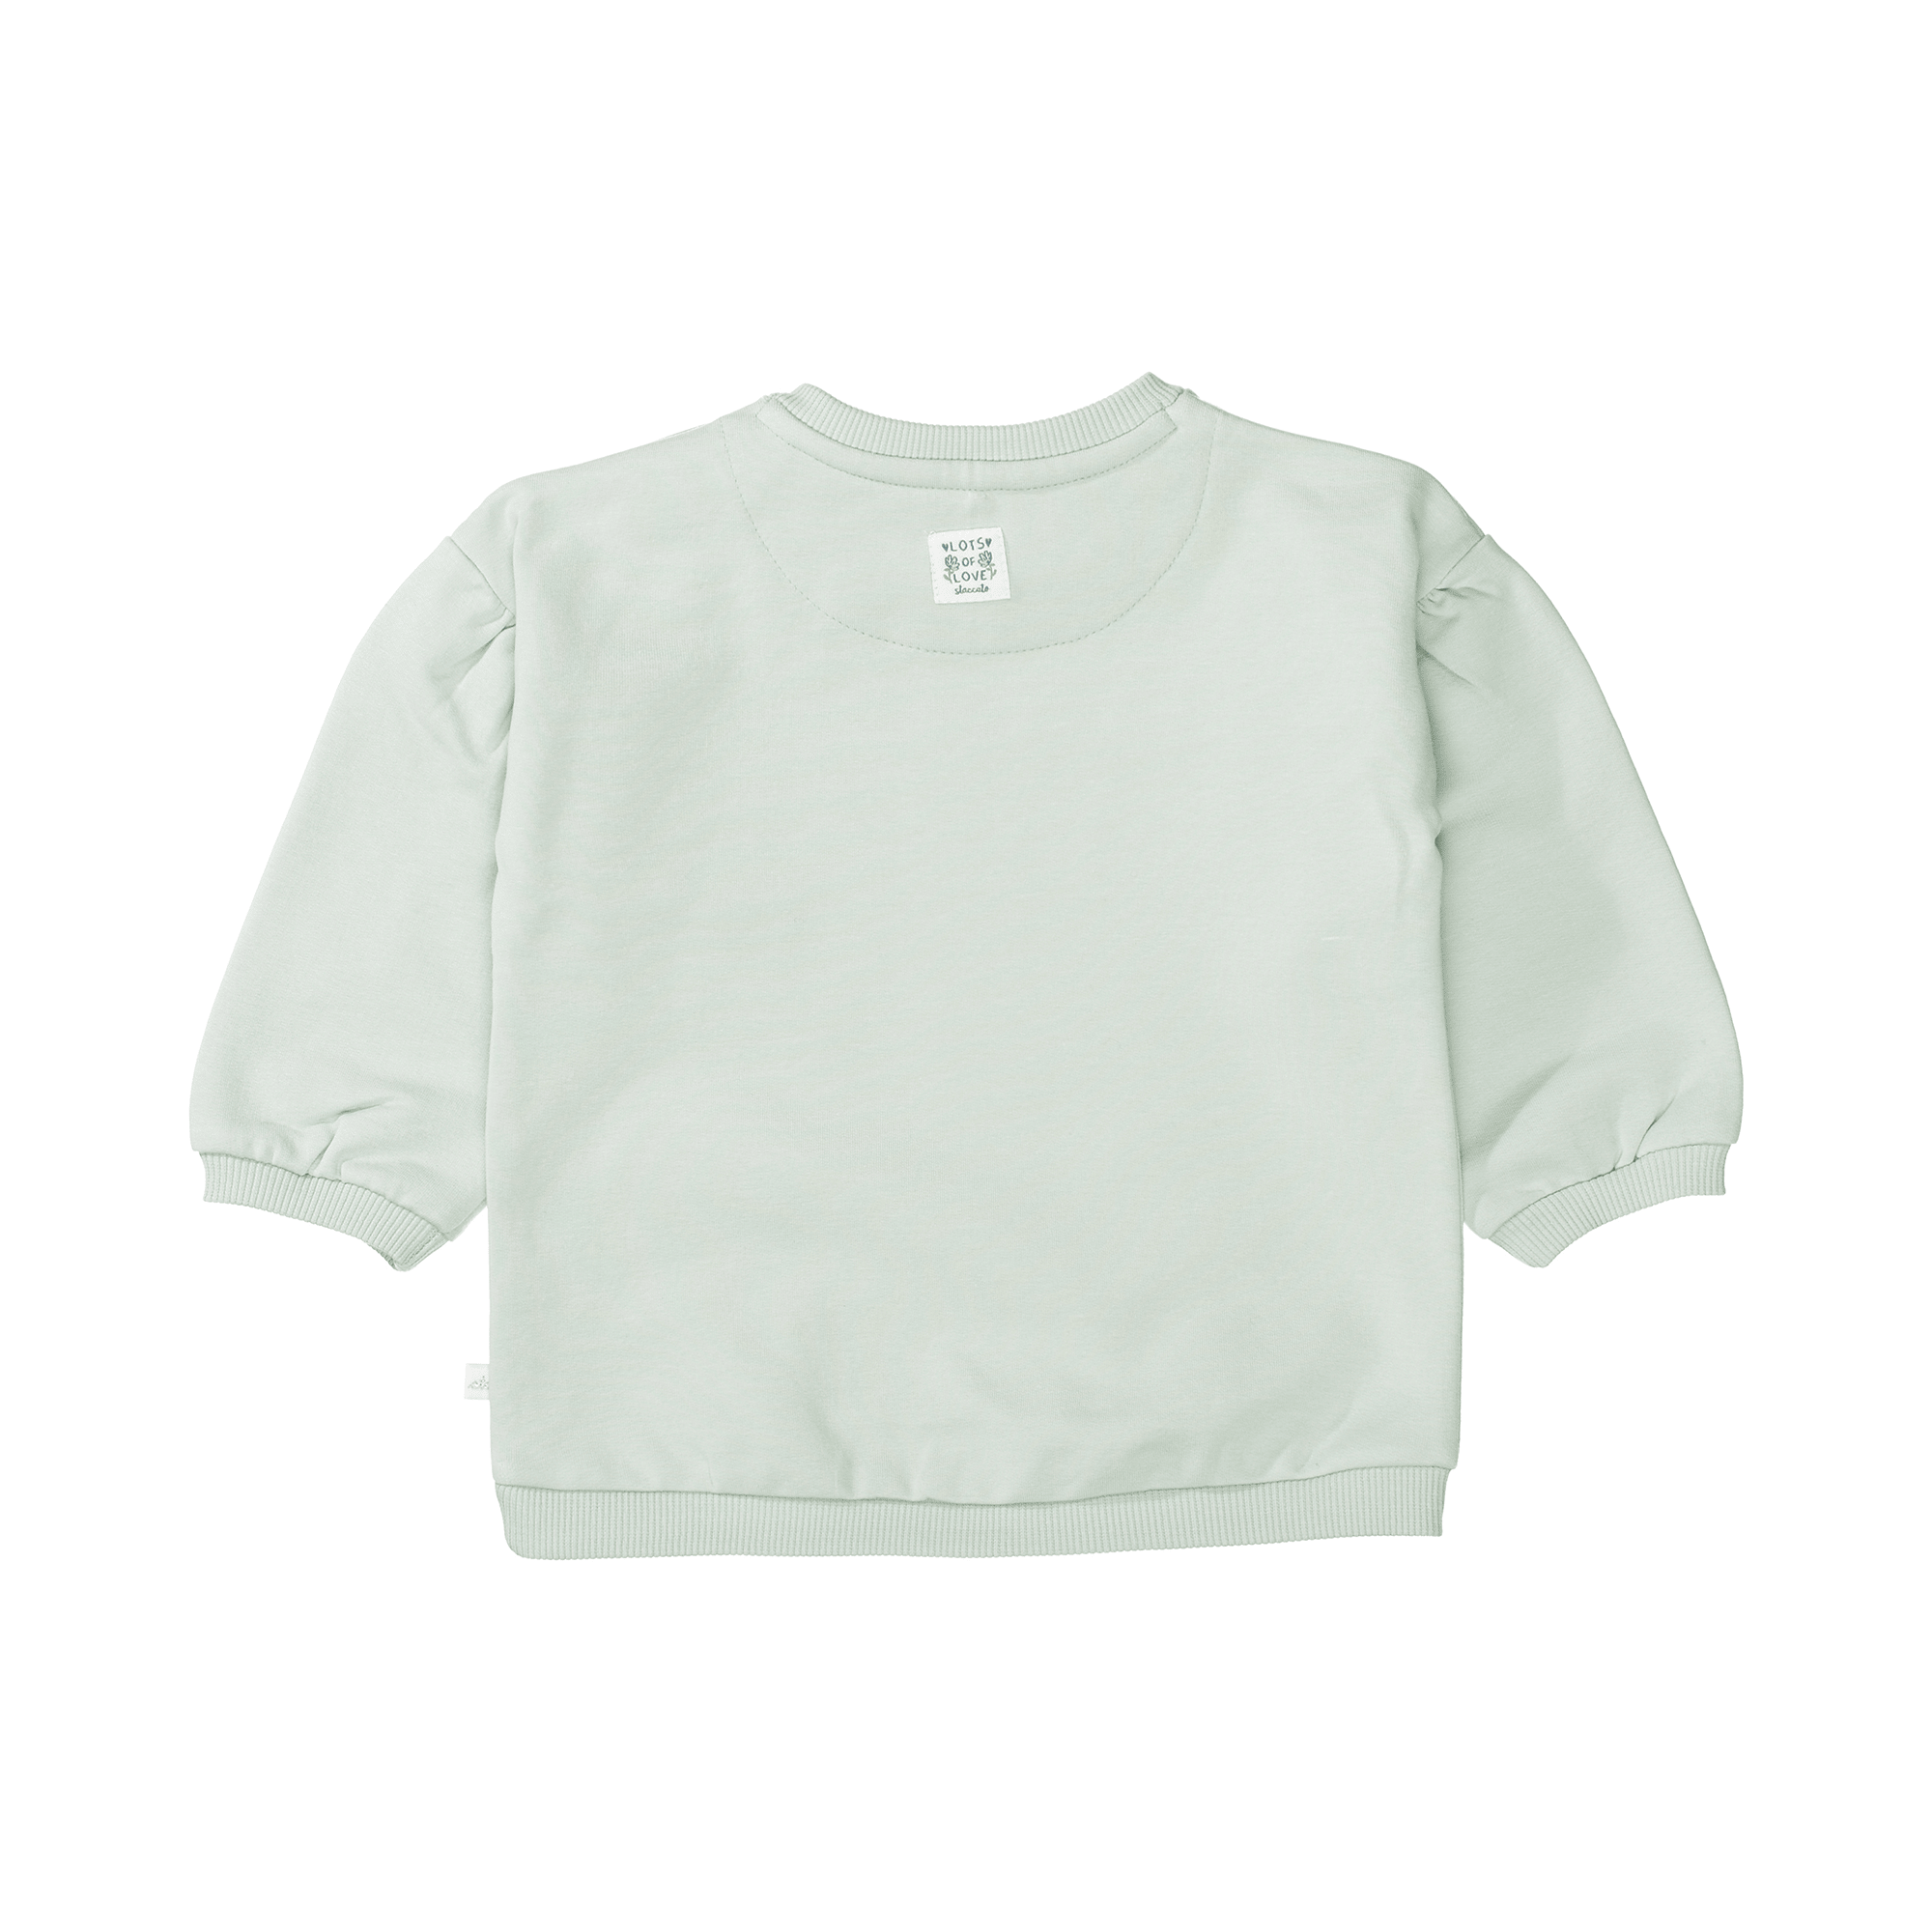 Sweatshirt Lovely STACCATO Mint M2000586869006 2